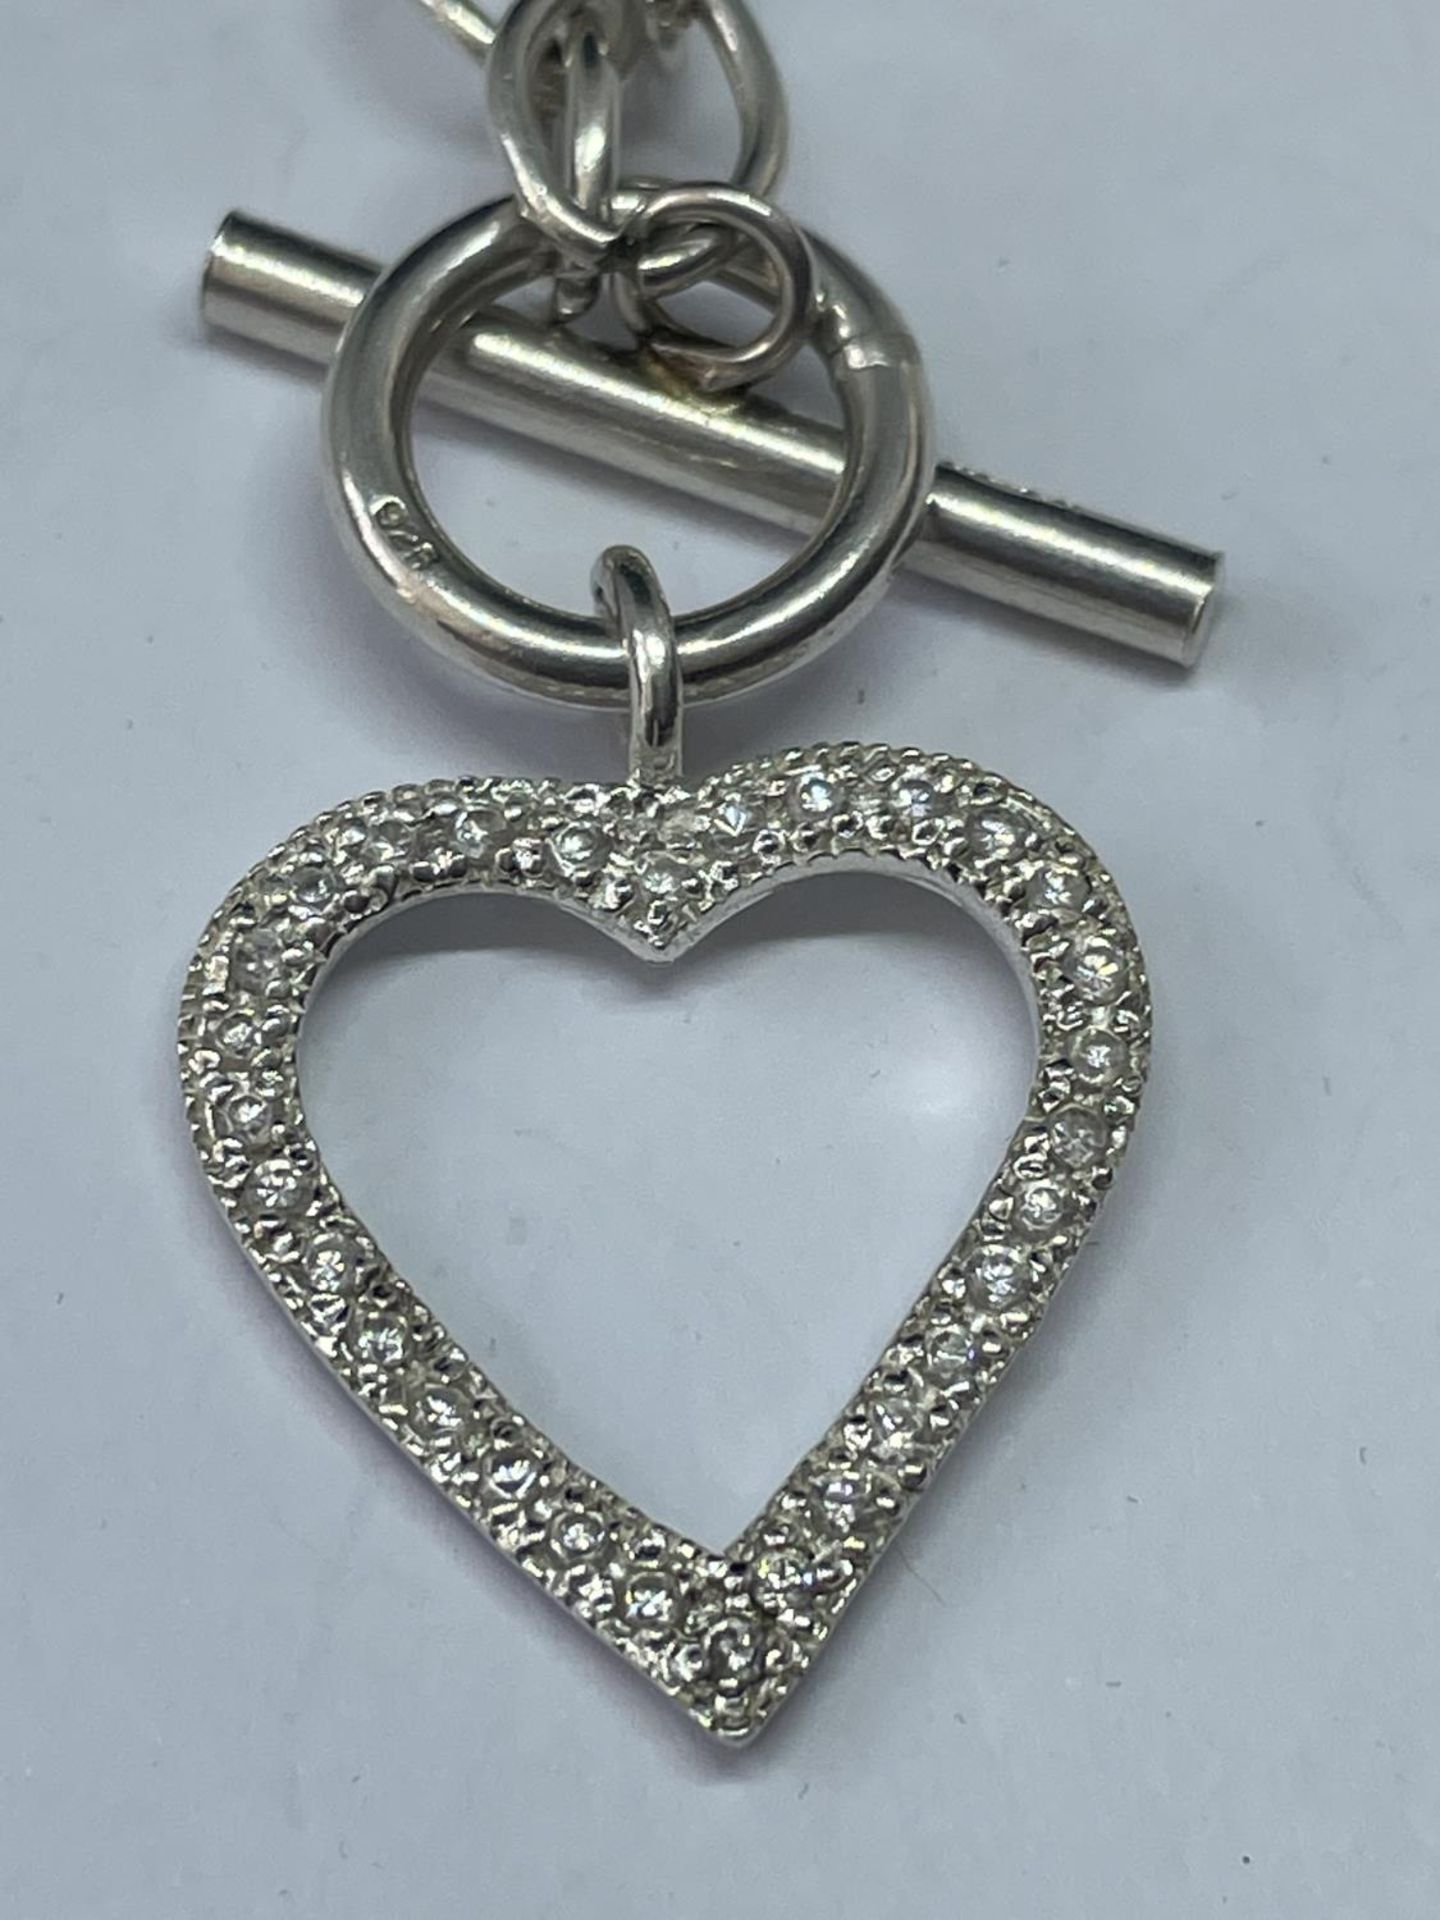 A MARKED SILVER T BAR NECKLACE WITH A HEART PENDANT - Image 2 of 3